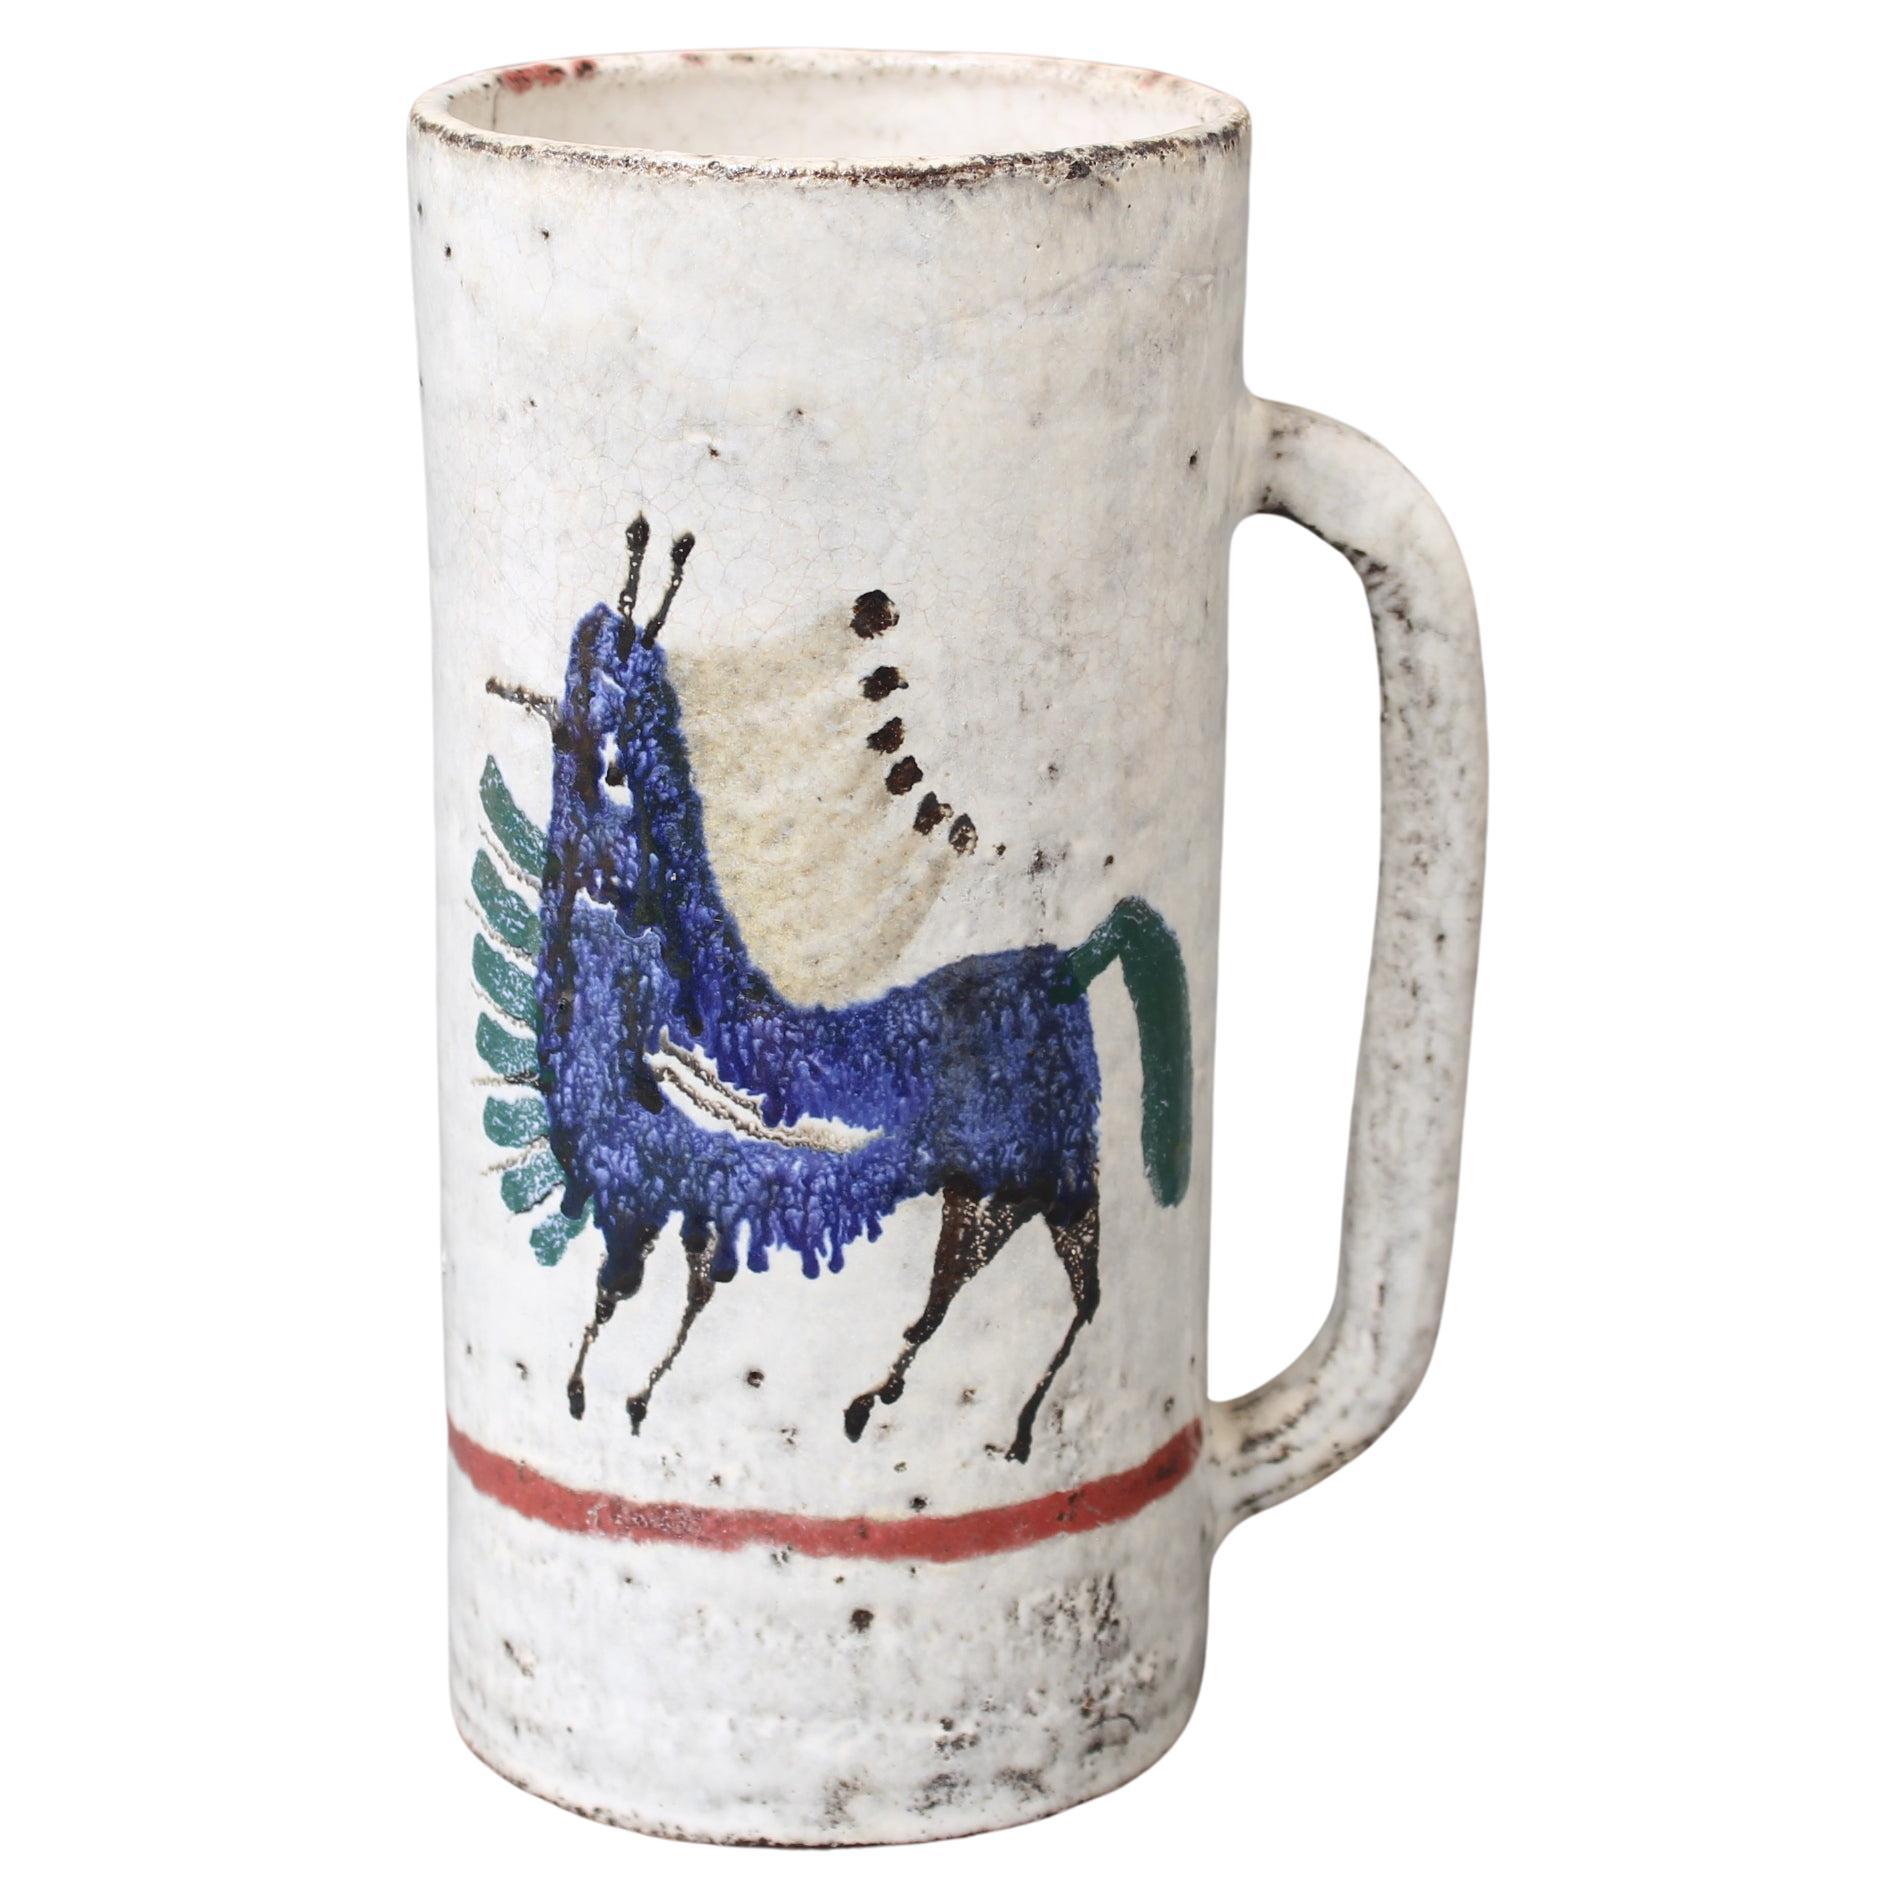 Vintage French Ceramic Decorative Stein by Gustave Reynaud for Le Mûrier Studio  For Sale